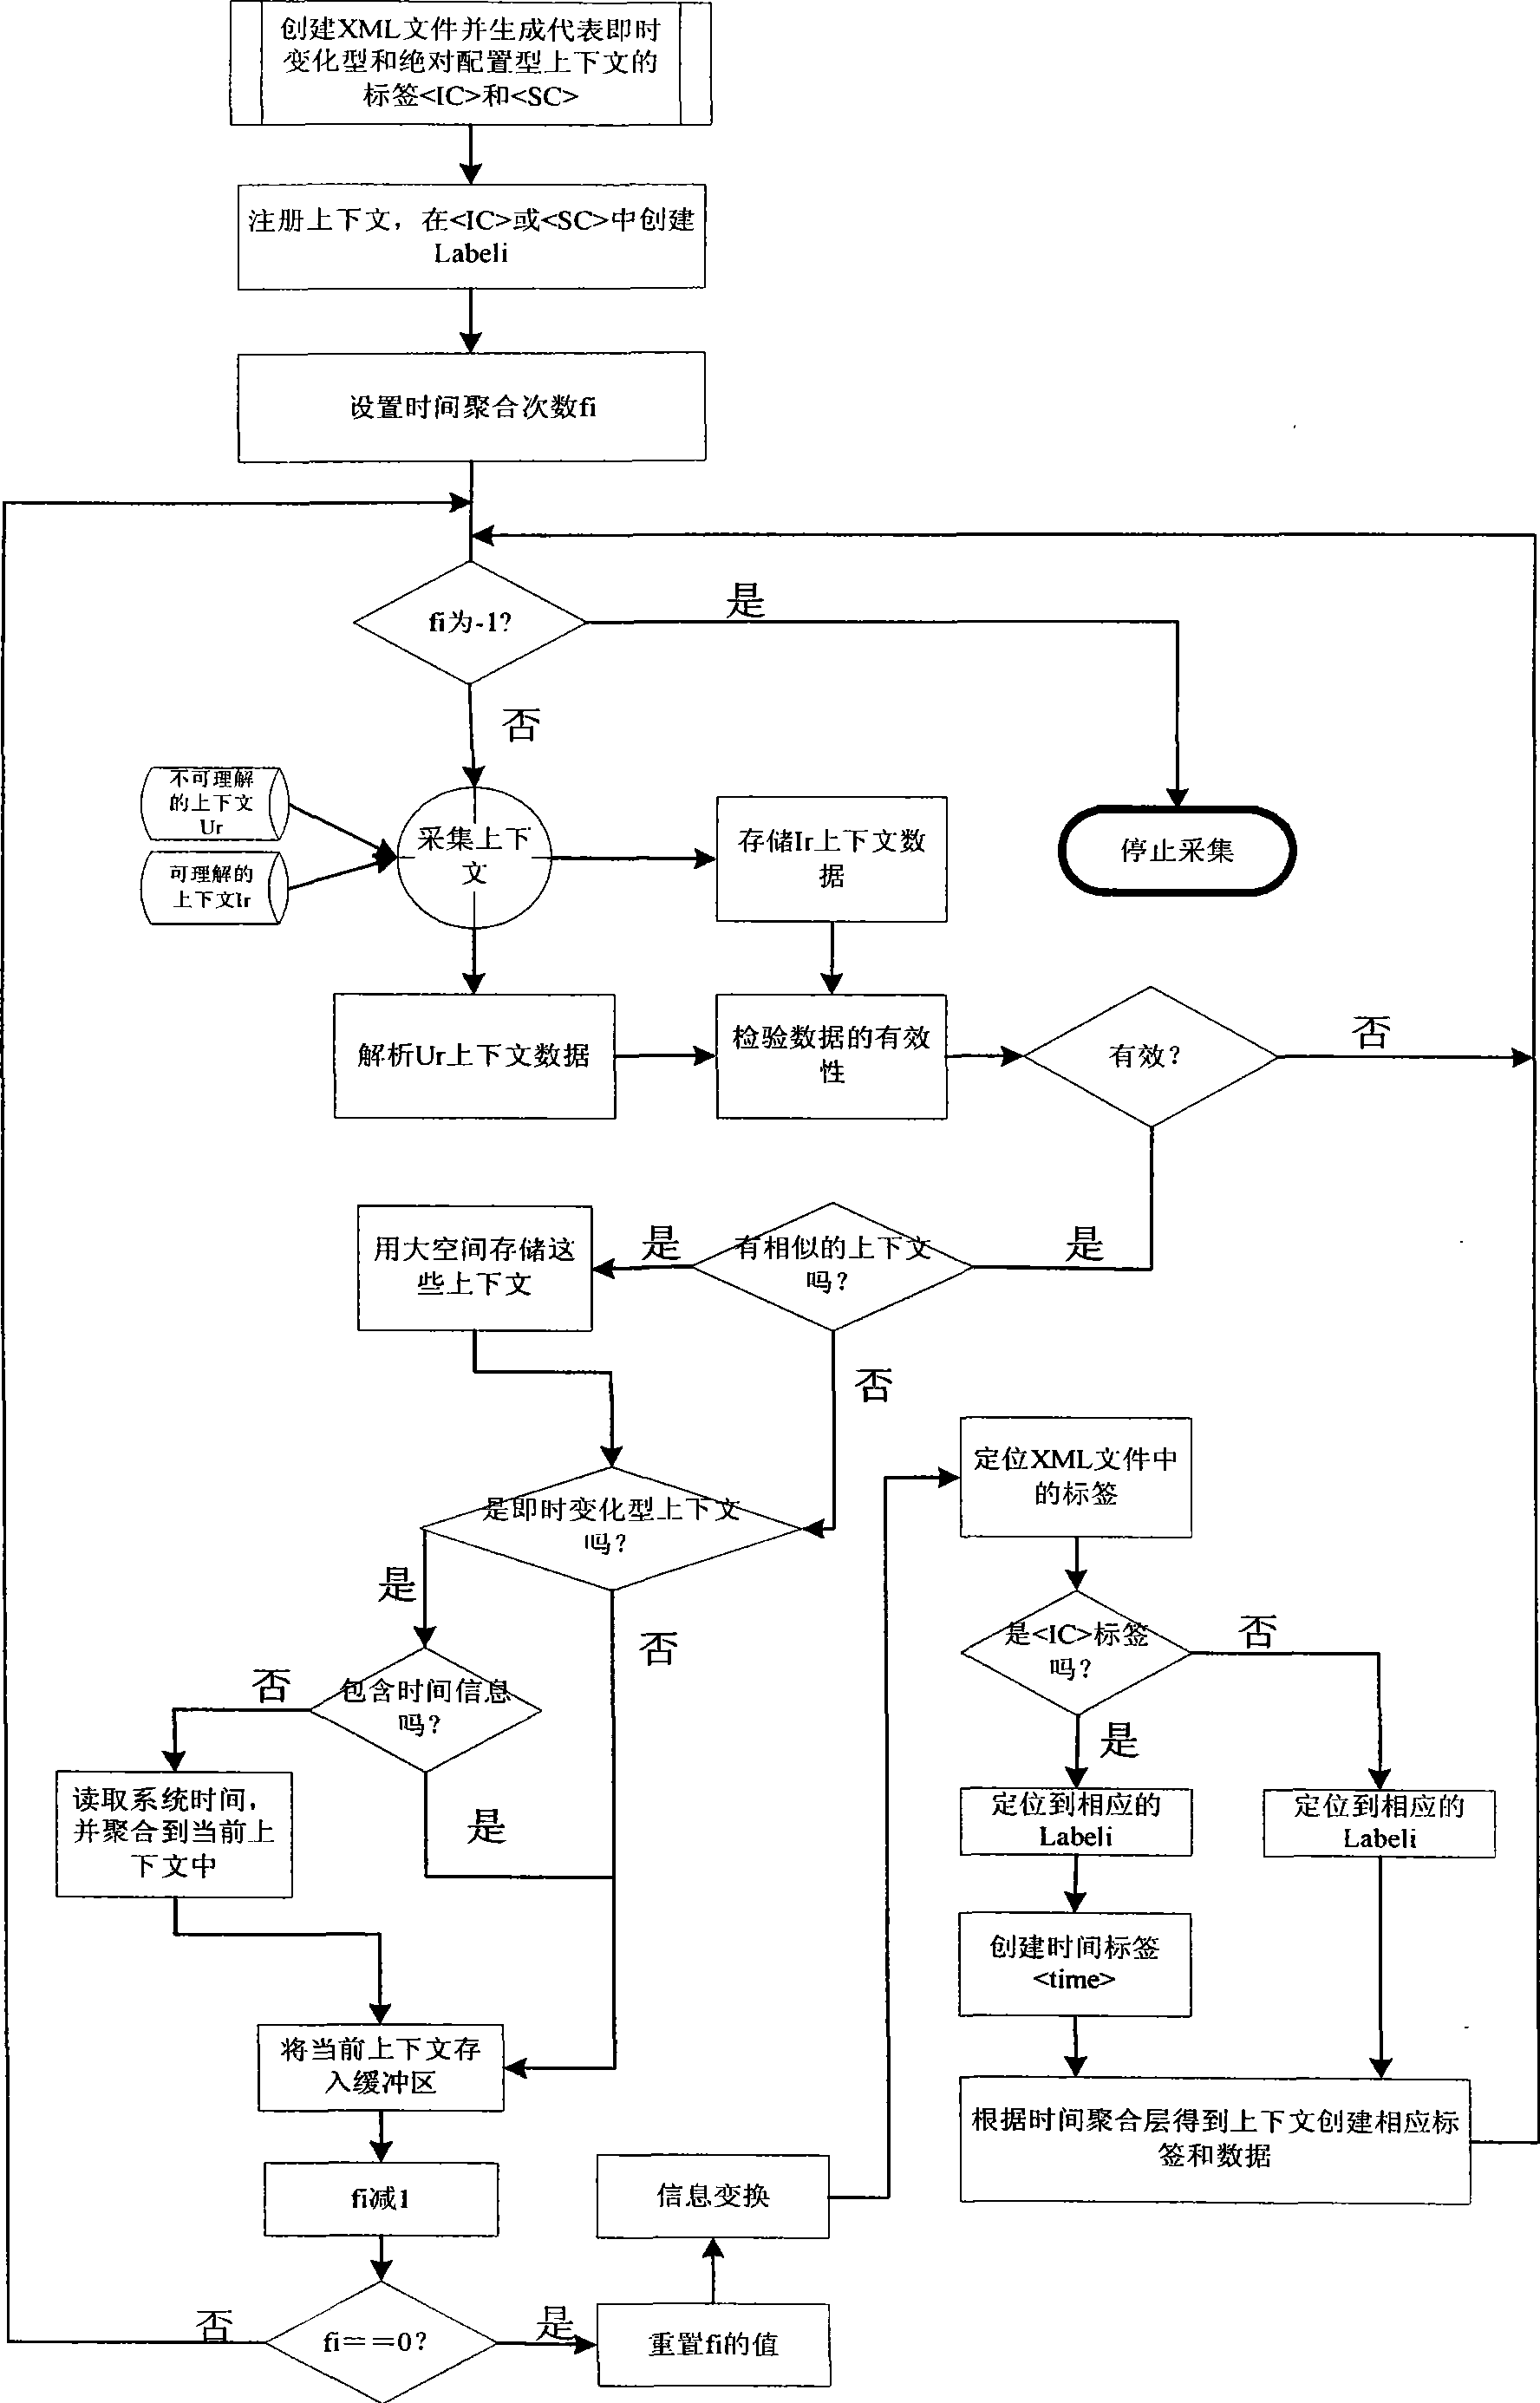 Polymerization process for calculating context facing to generalization